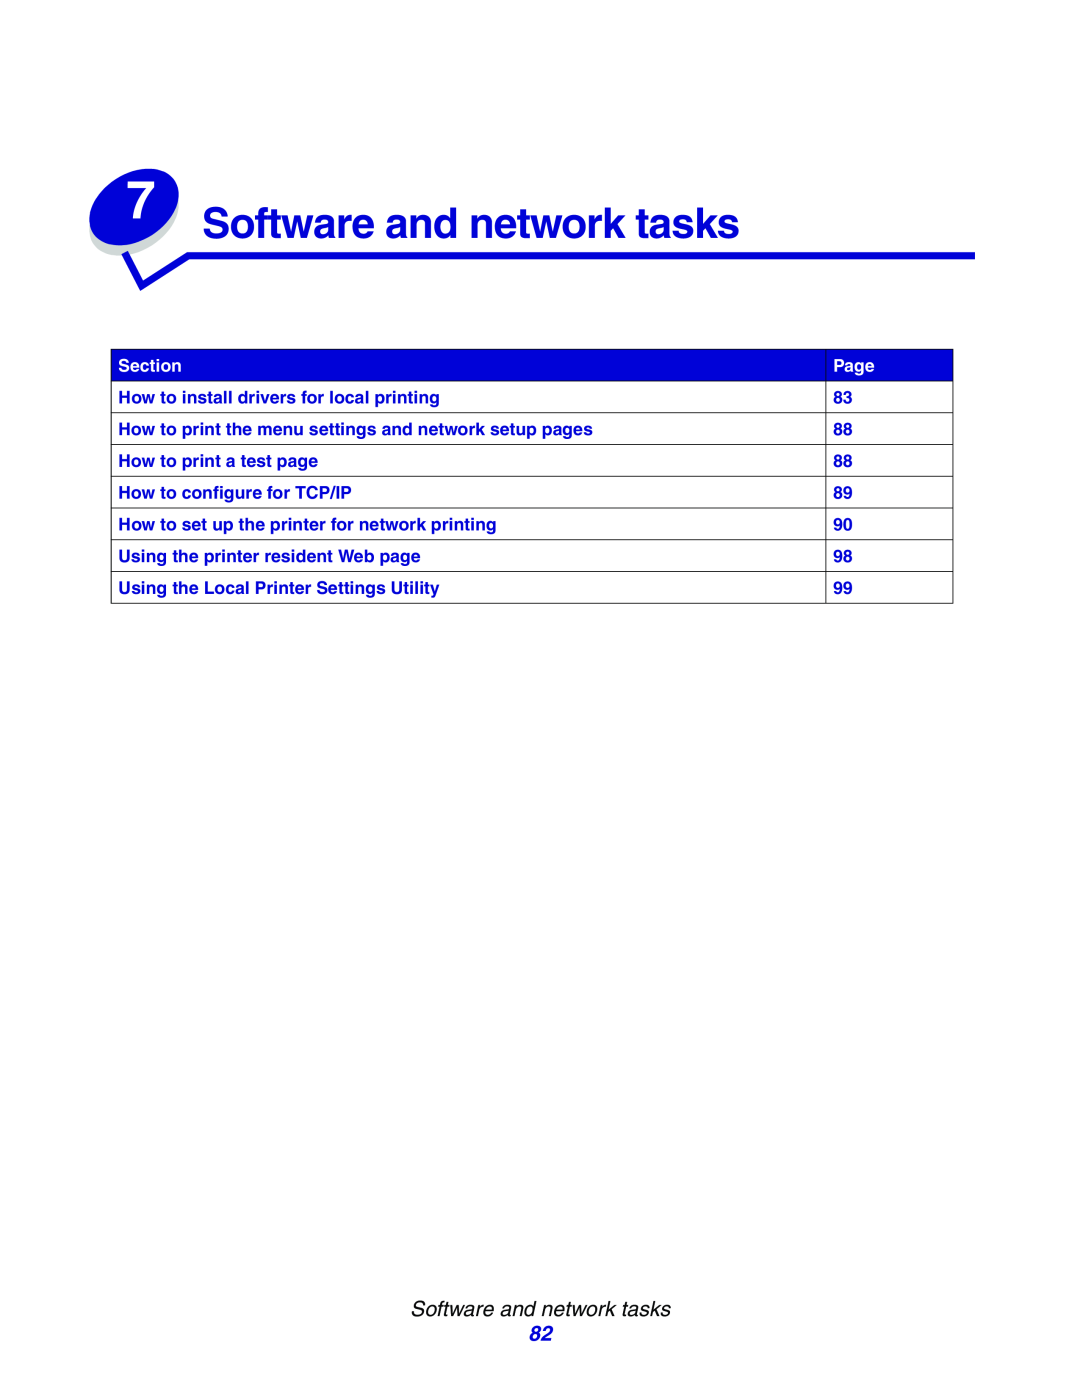 Lexmark E234N manual Software and network tasks, Section, Page 